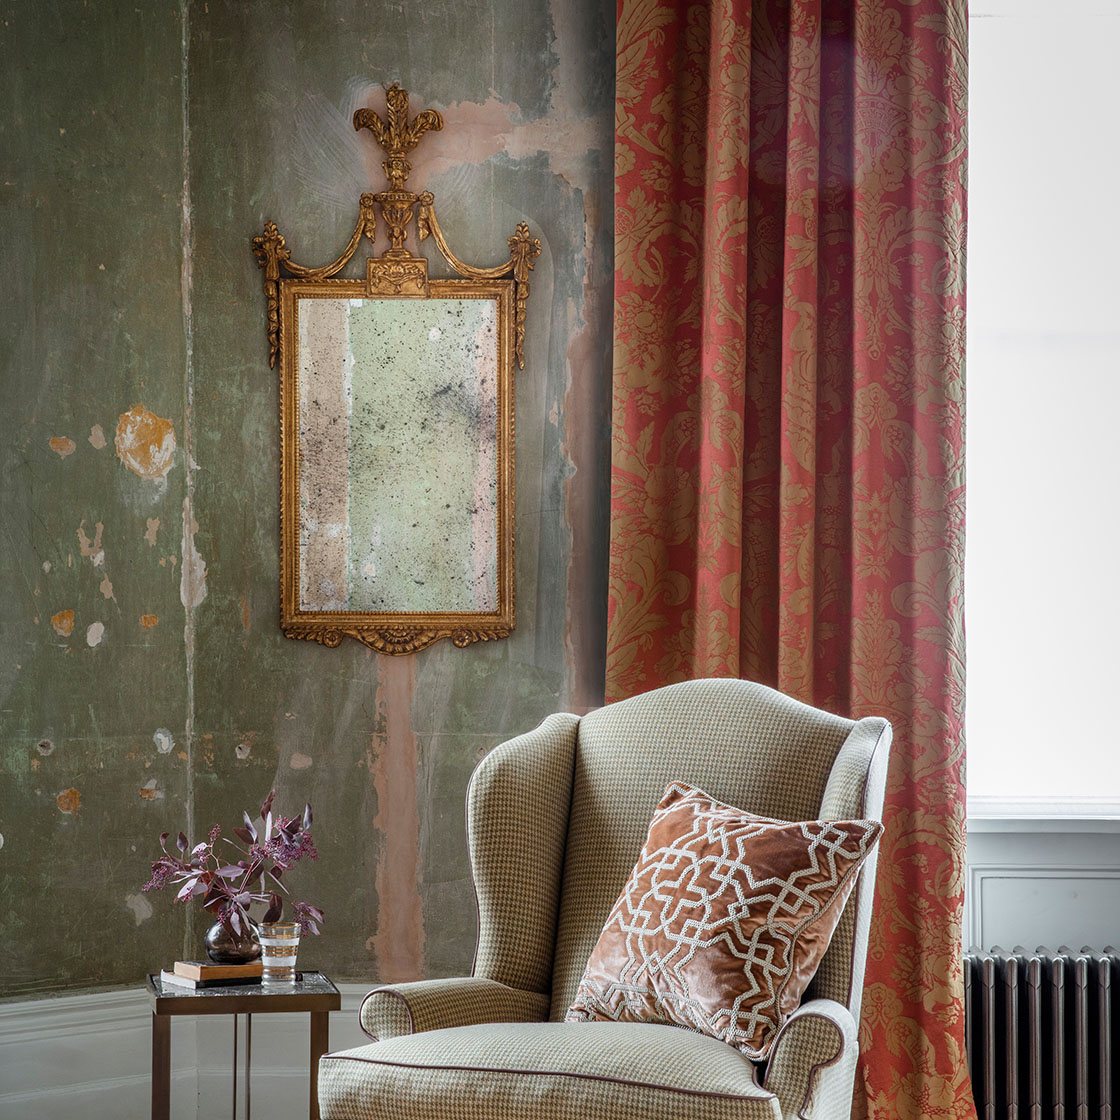 Windsor mirror in Burnt gold with Clubwing chair and Habibi cushion - Beaumont & Fletcher